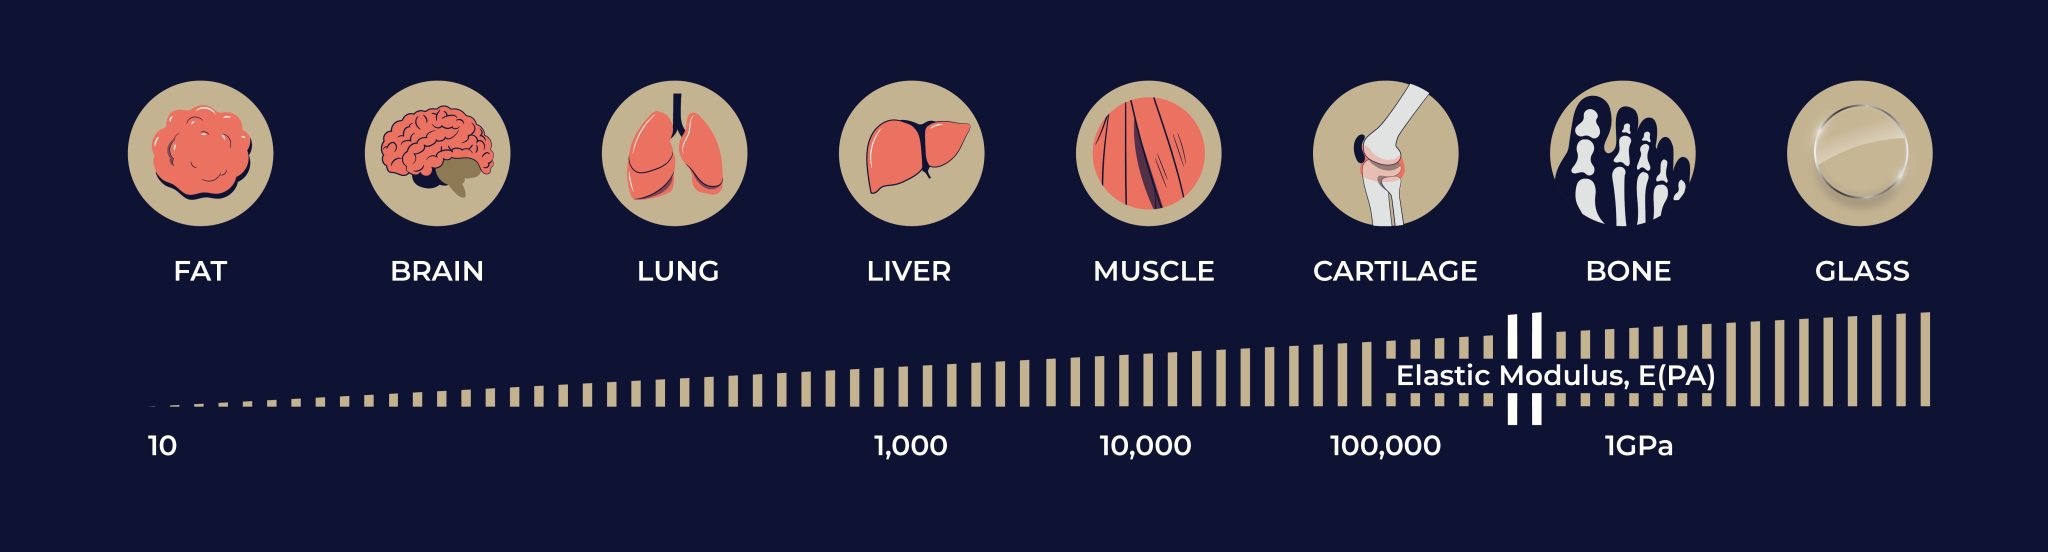 A graph of different organs like fat, brain, lung, liver, muscle, cartilage, bone and glass's matrix stiffness in elastic modulus